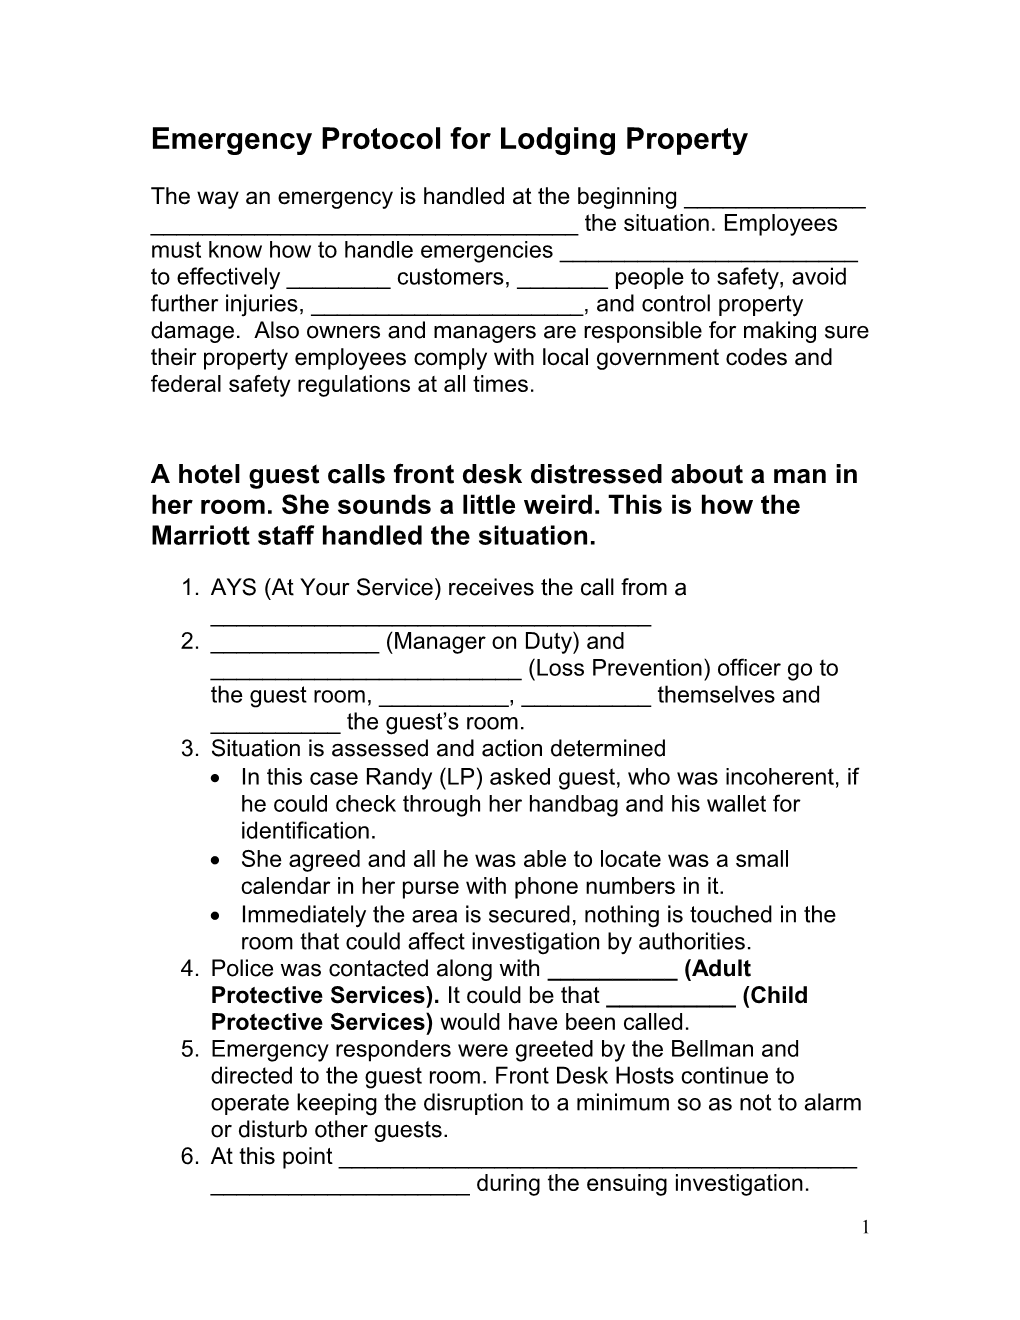 Emergency Protocol for Lodging Property